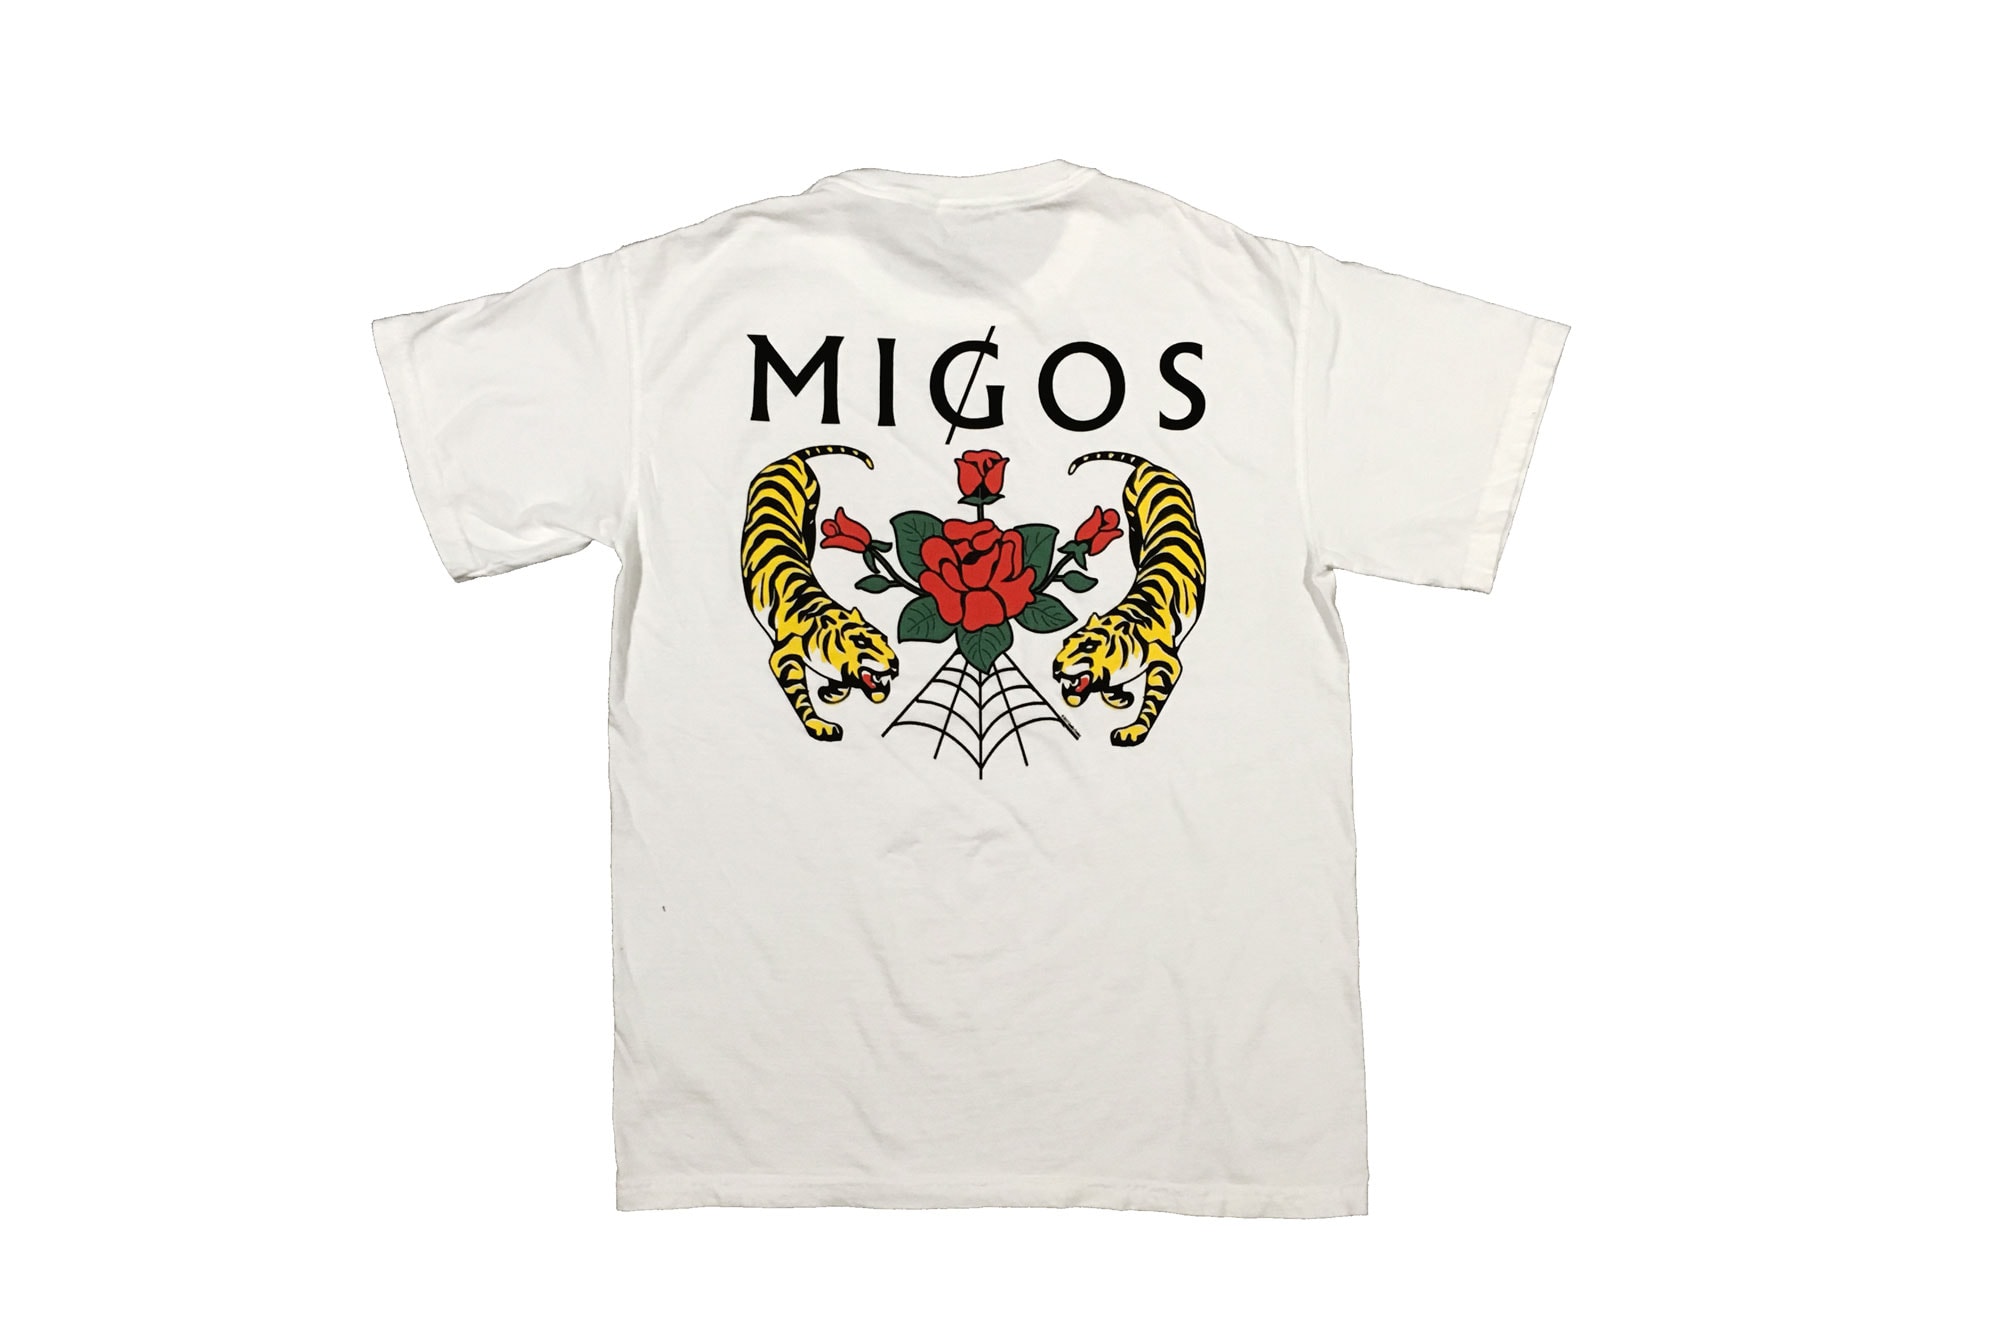 Migos Clothing Collection Bloomingdales New York City Rapper Branded Lexington Avenue 59th Street Streetwear Culture II Culture 2